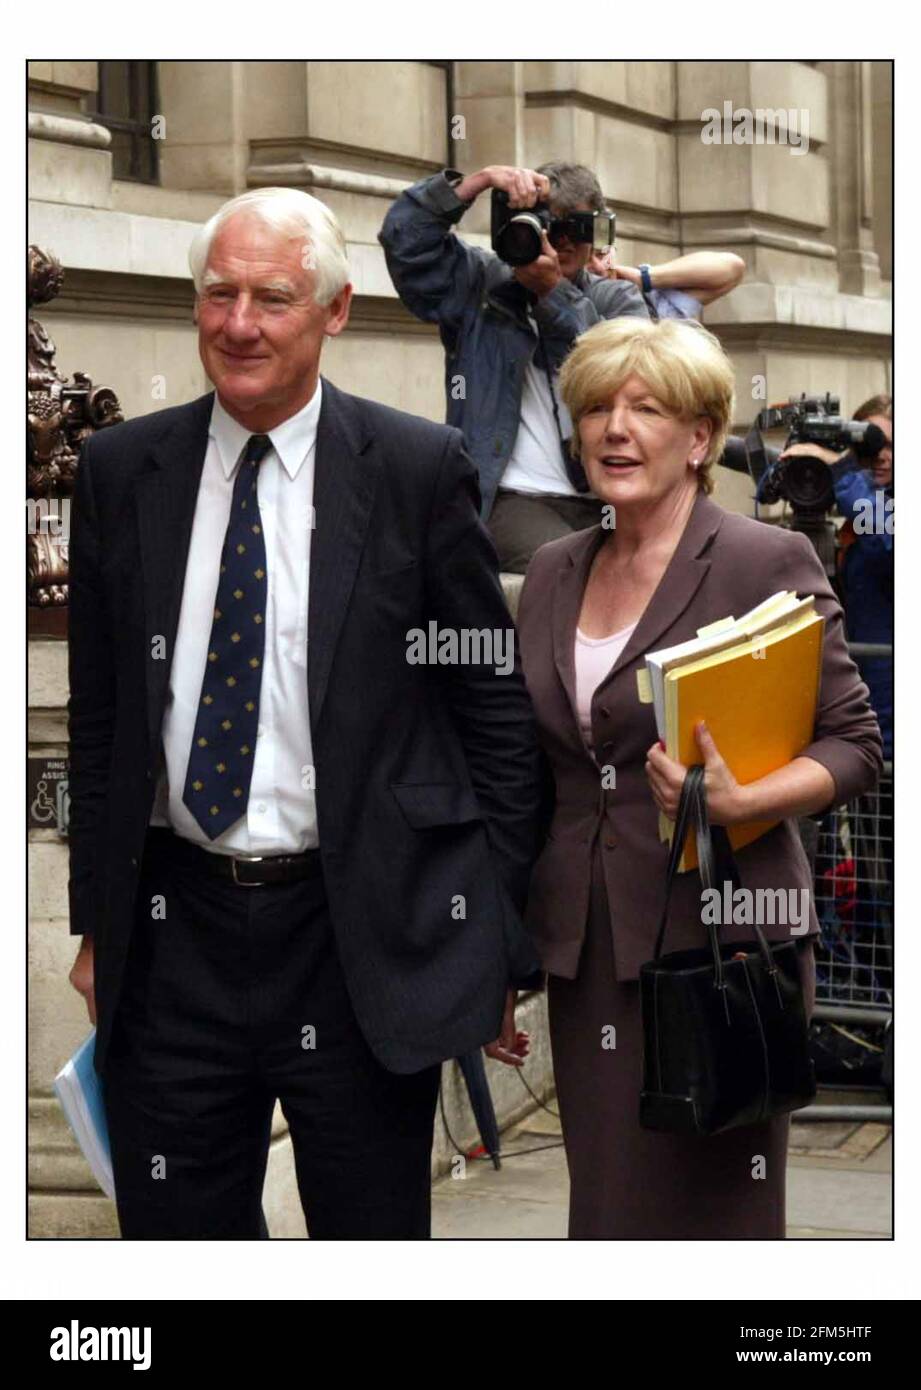 Lord Butler arrives at the press conf to release his report onf Intelligence on Weapons of Mass Destruction Pic David Sandison 14/07/2004 Stock Photo